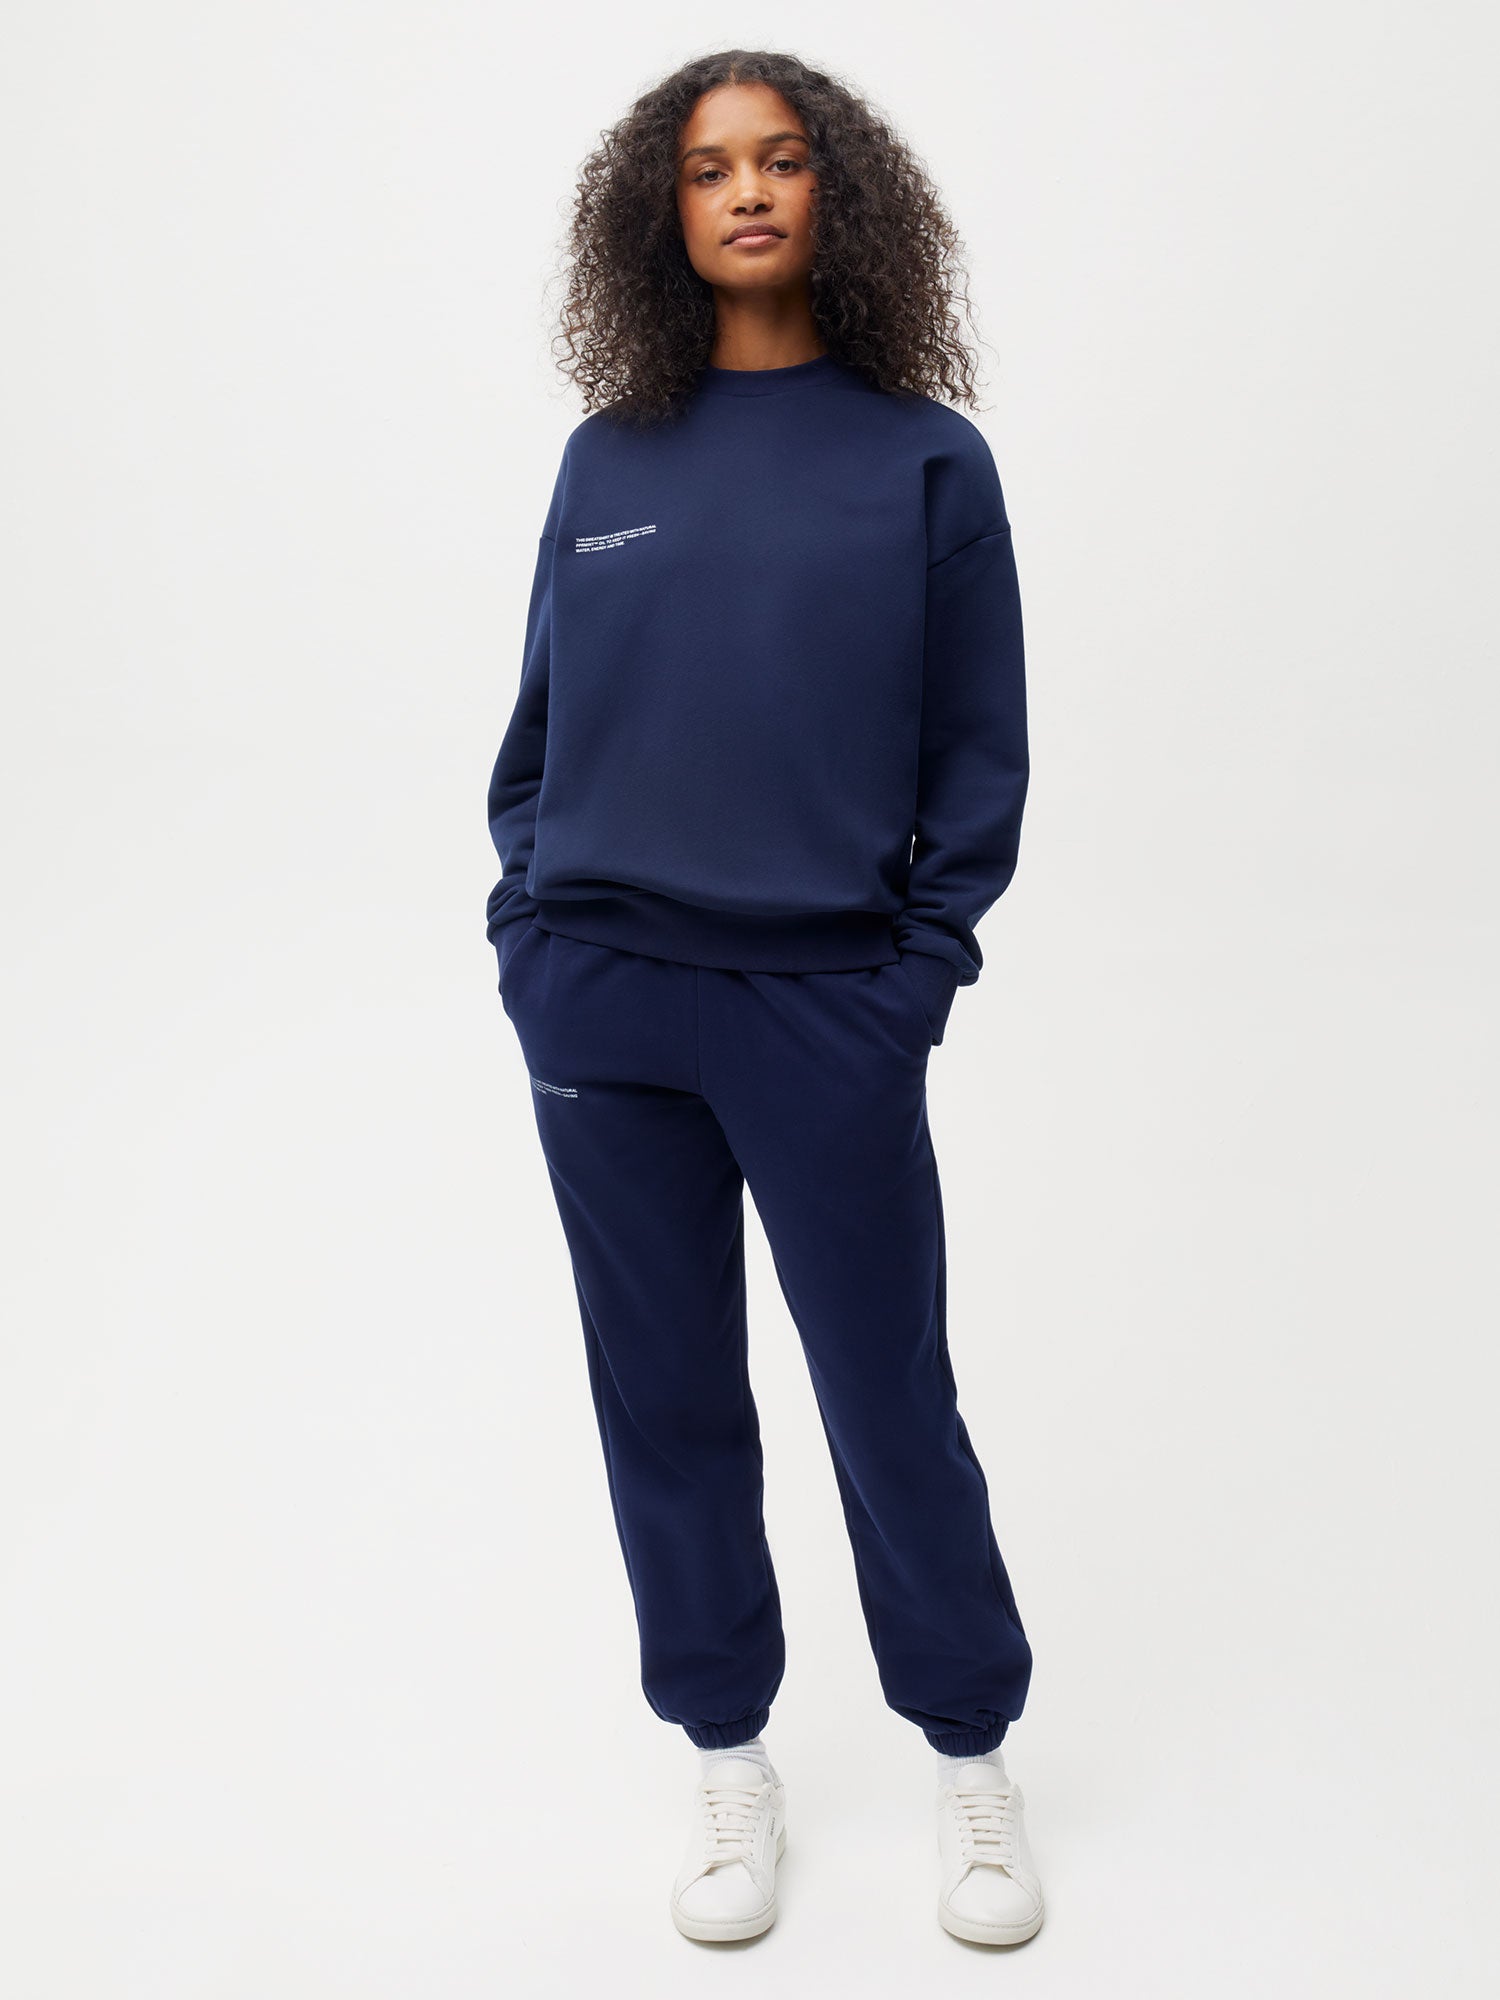 365 Midweight Track Pants—navy blue